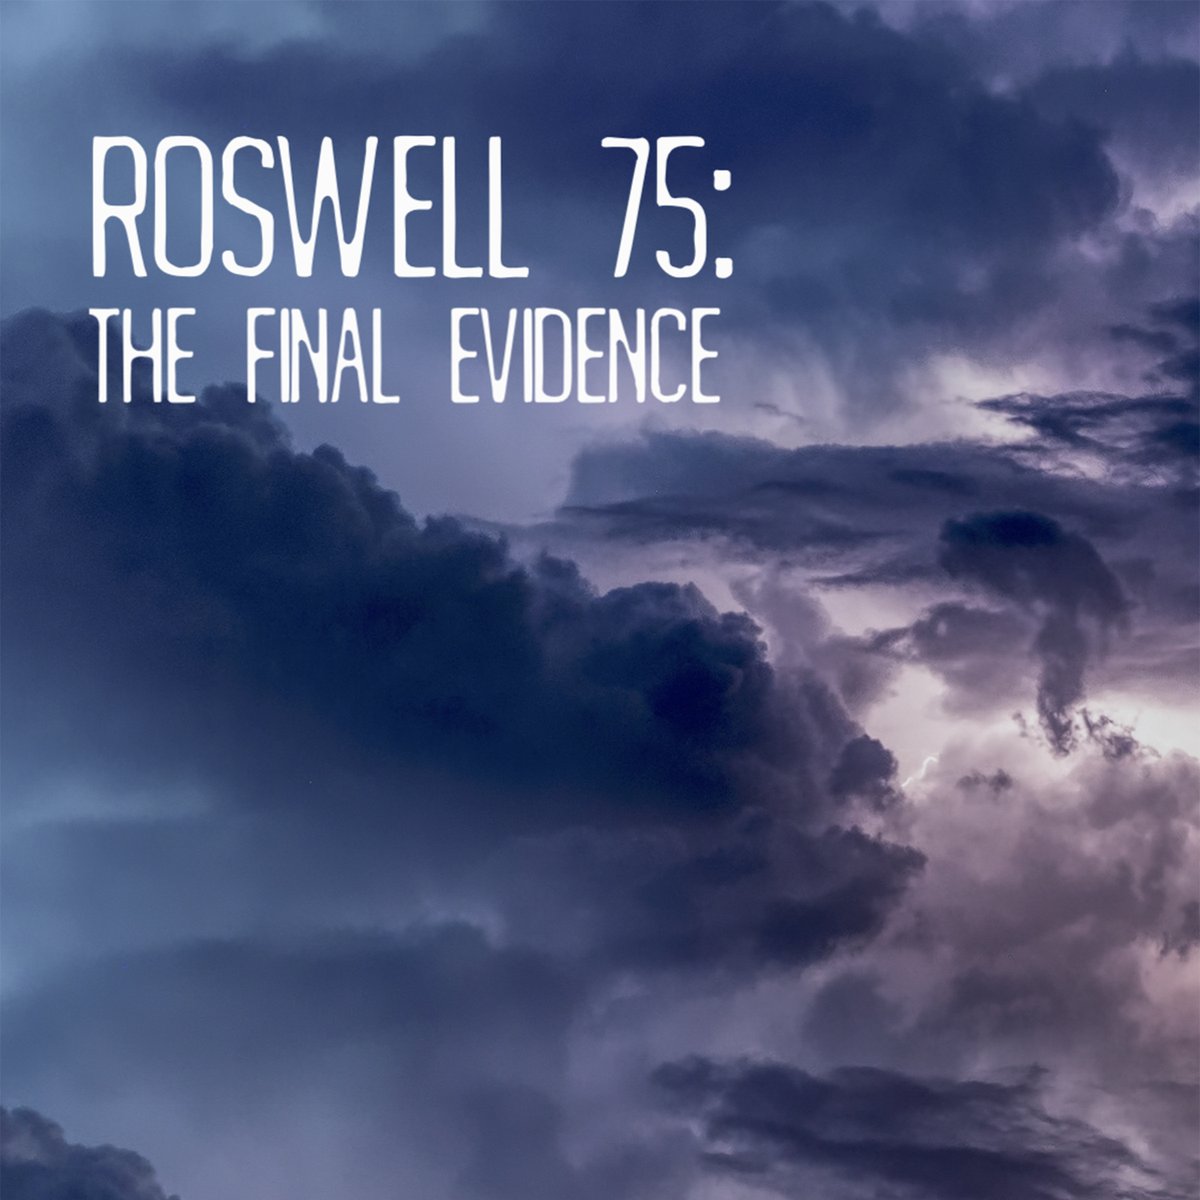 Was it a weather balloon... or something else? See the #FinalEvidence tonight at 9. #Roswell75  #UFOThursday #UFOThursdays #ufotwitter #ufo #UAP #UAPTwitter @philip_mantle @AnnaWhitty2 @theurigeller